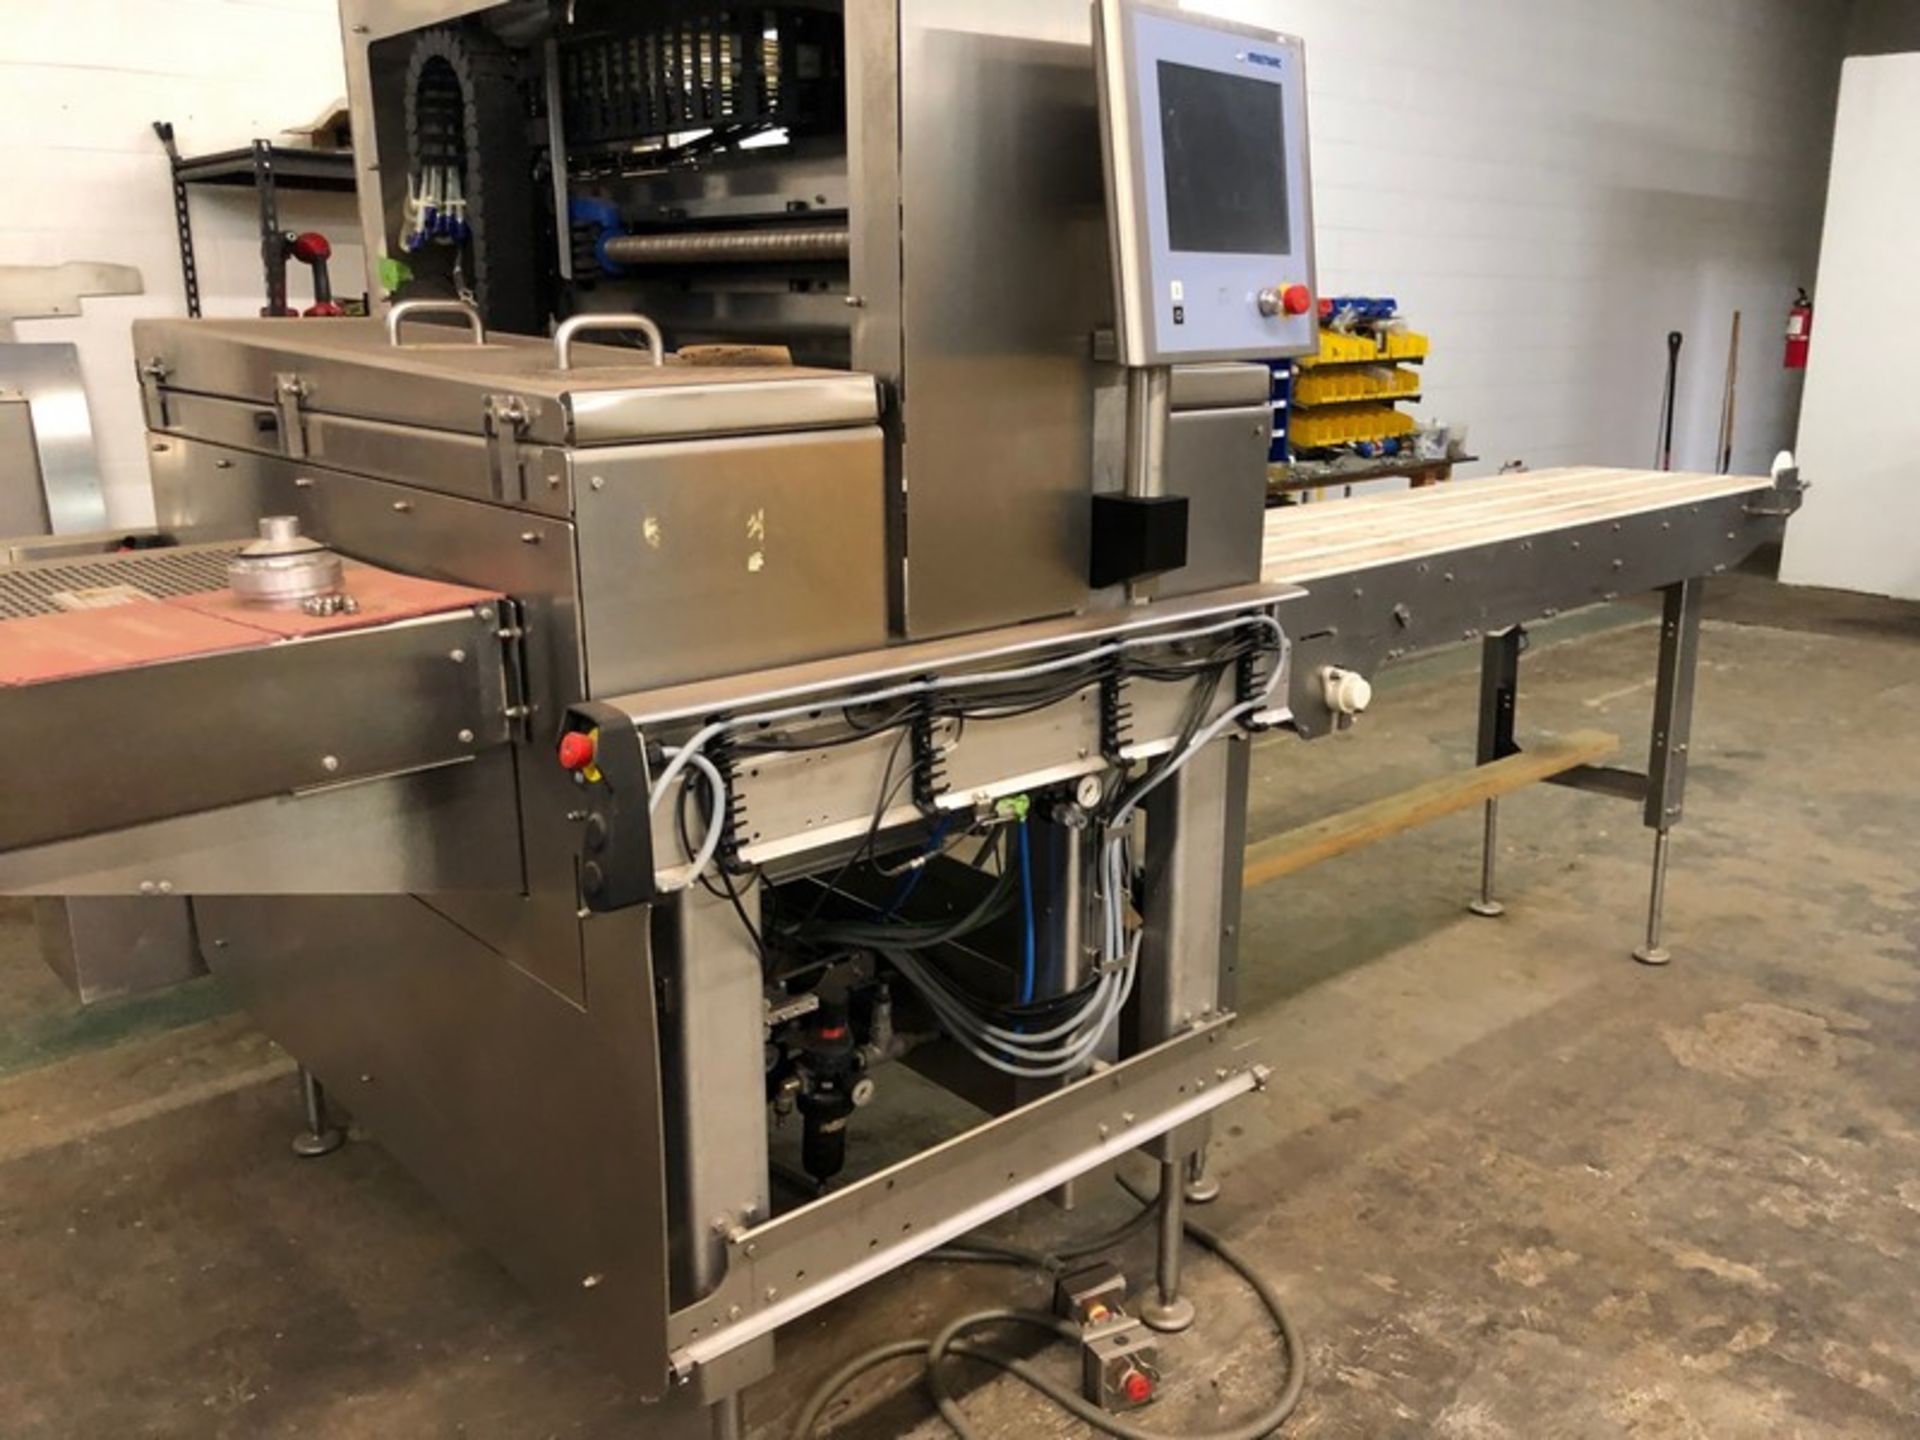 2012 MultiVac Vacuum Packager, M/N H050, S/N 158613, 208 Volts, 1 Phase (LOCATED IN BELTSVILLE, MD) - Image 10 of 10